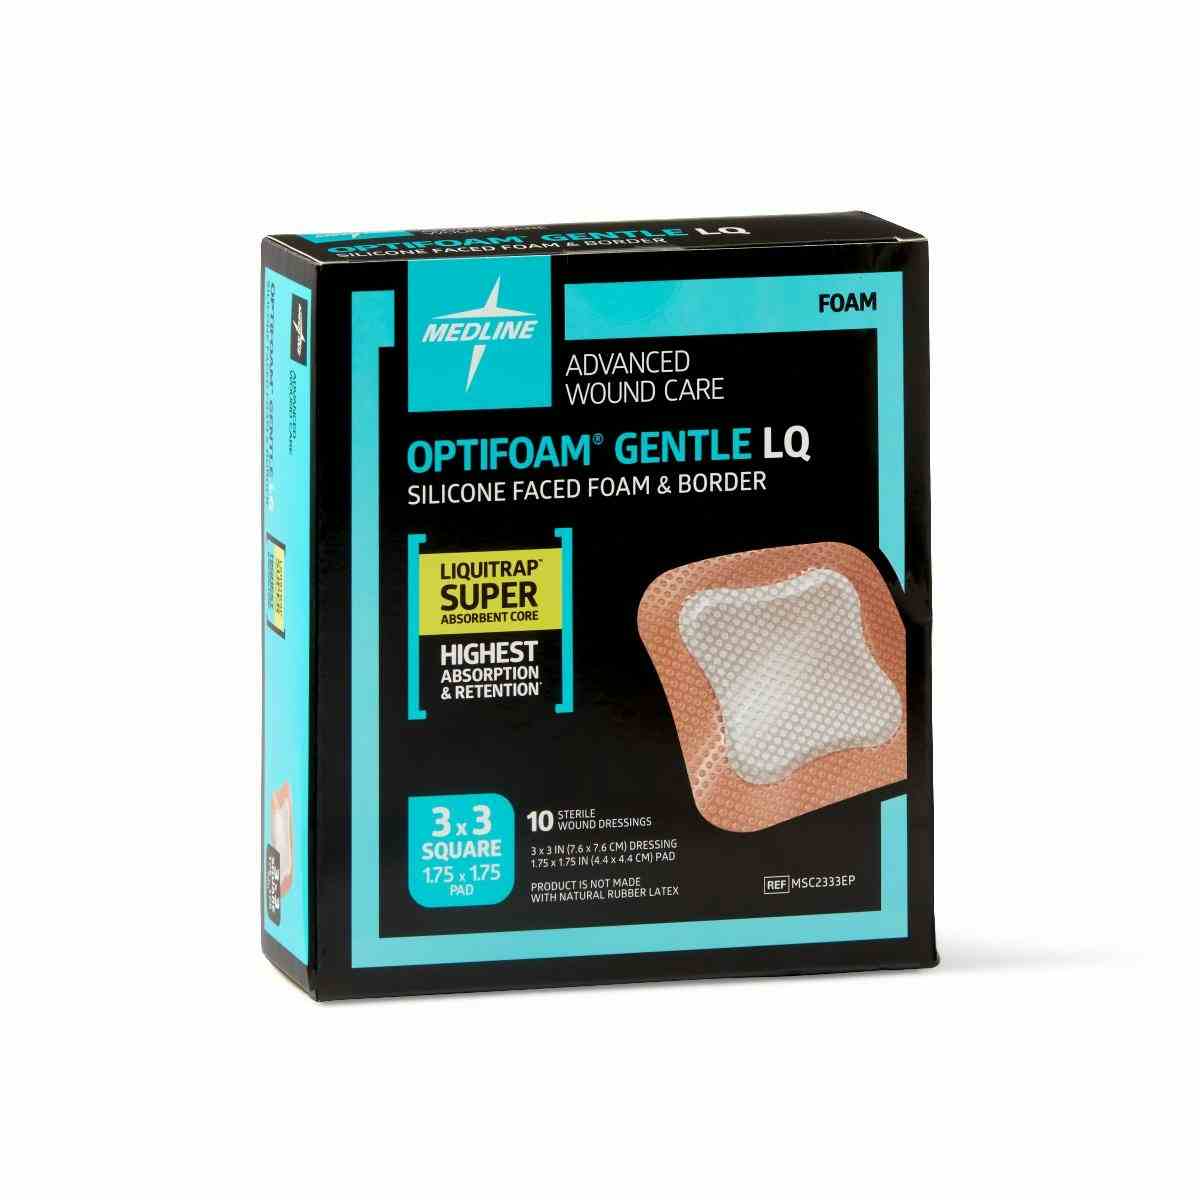 Optifoam Gentle LQ Silicone-Faced Foam Dressing with Liquitrap, MSC2333EPZ, 3 X 3 Inches - Box of 10